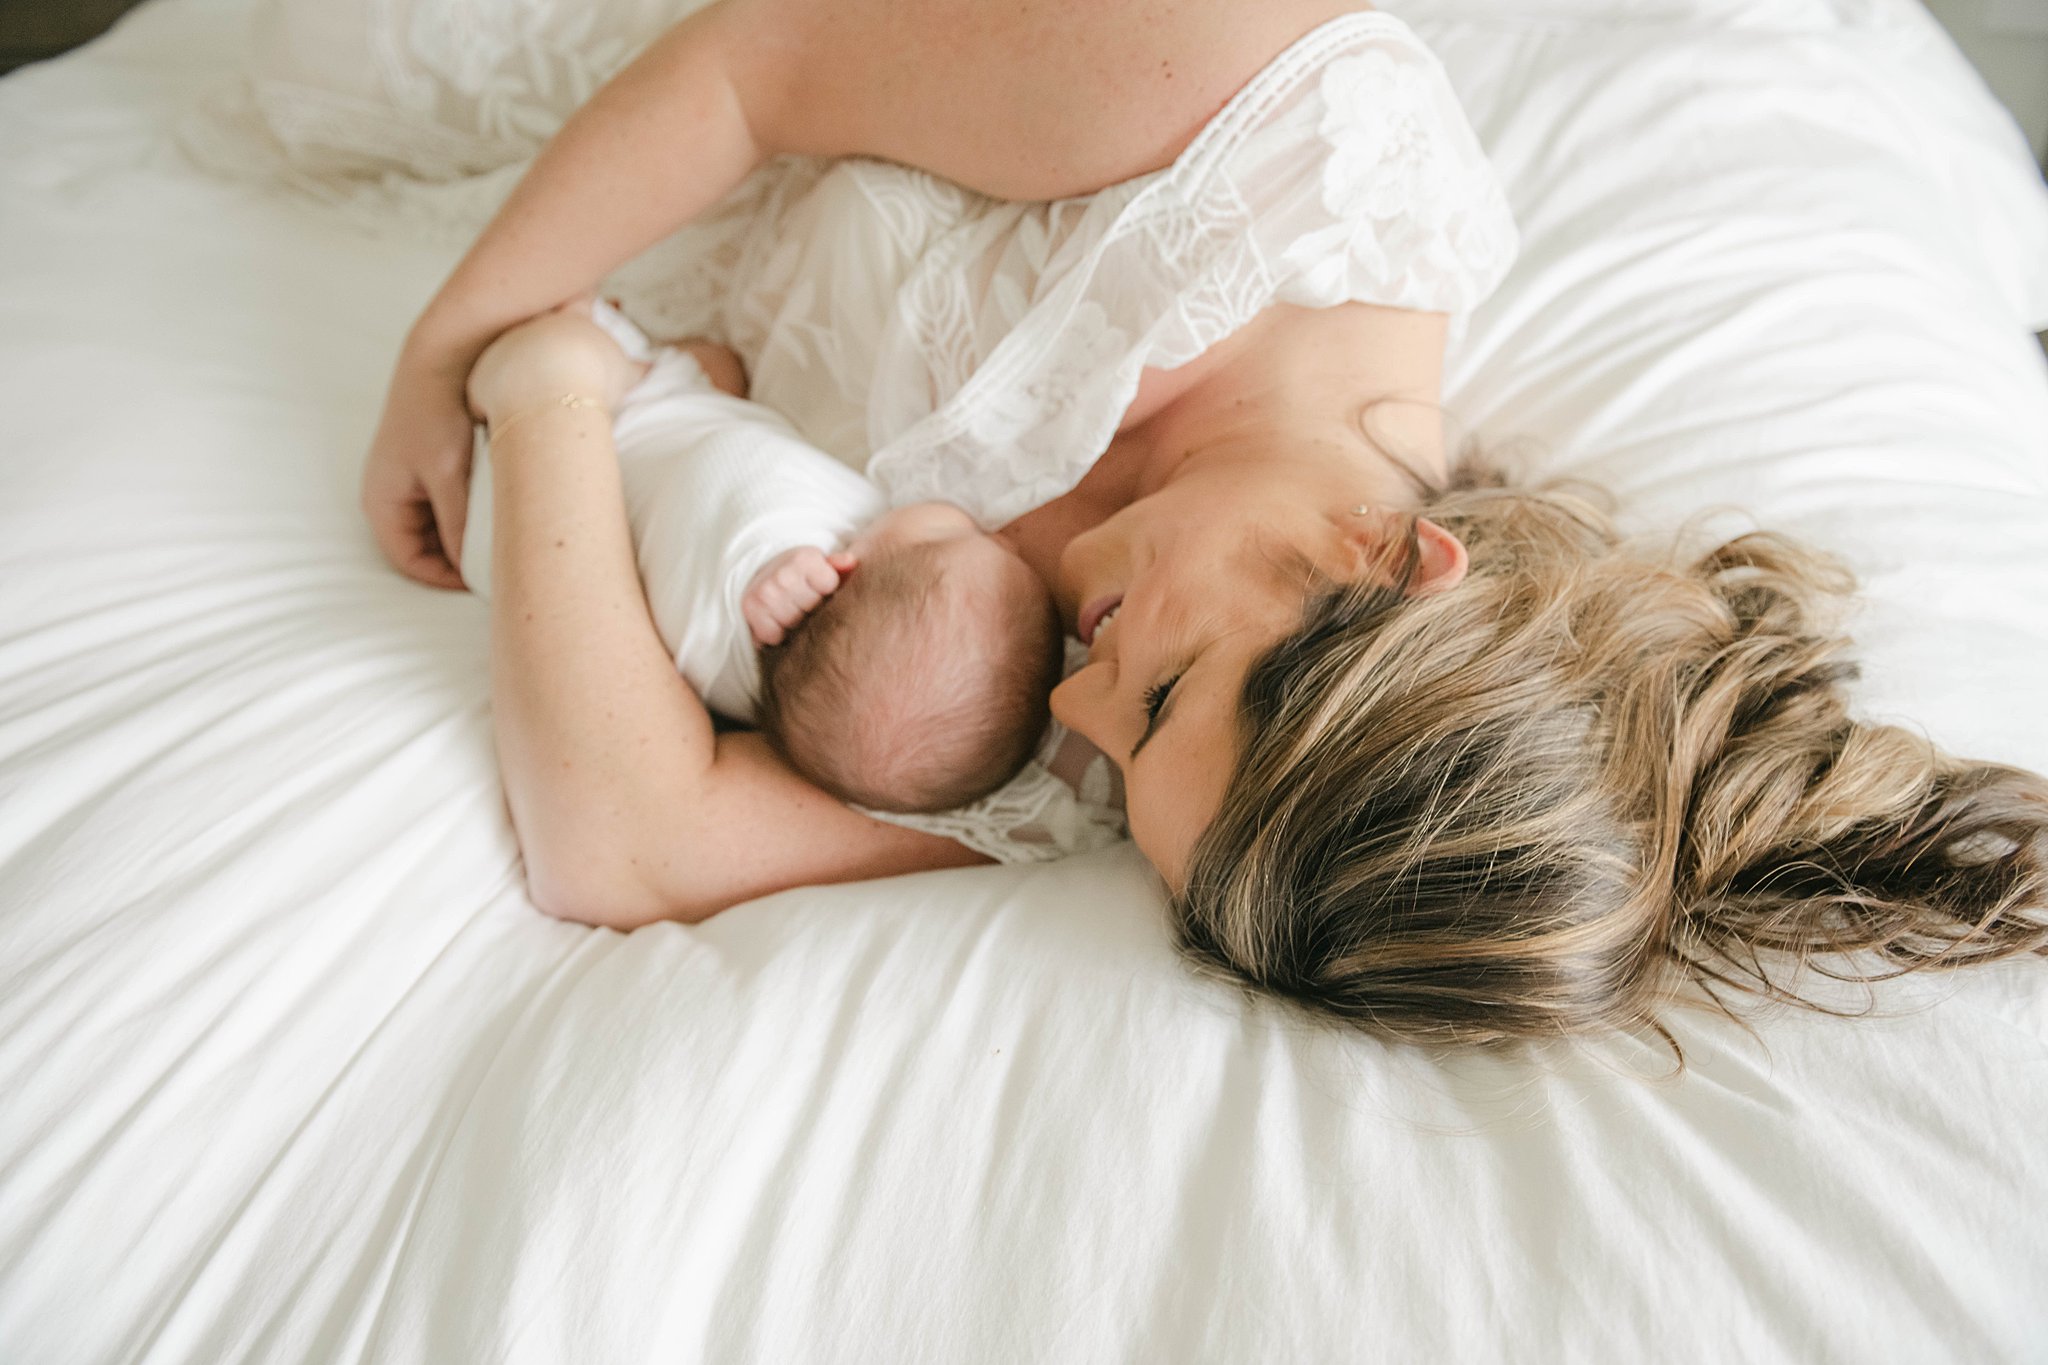 A mother cuddles on a bed with her newborn chiile while wearing a white dress blossoming bellies